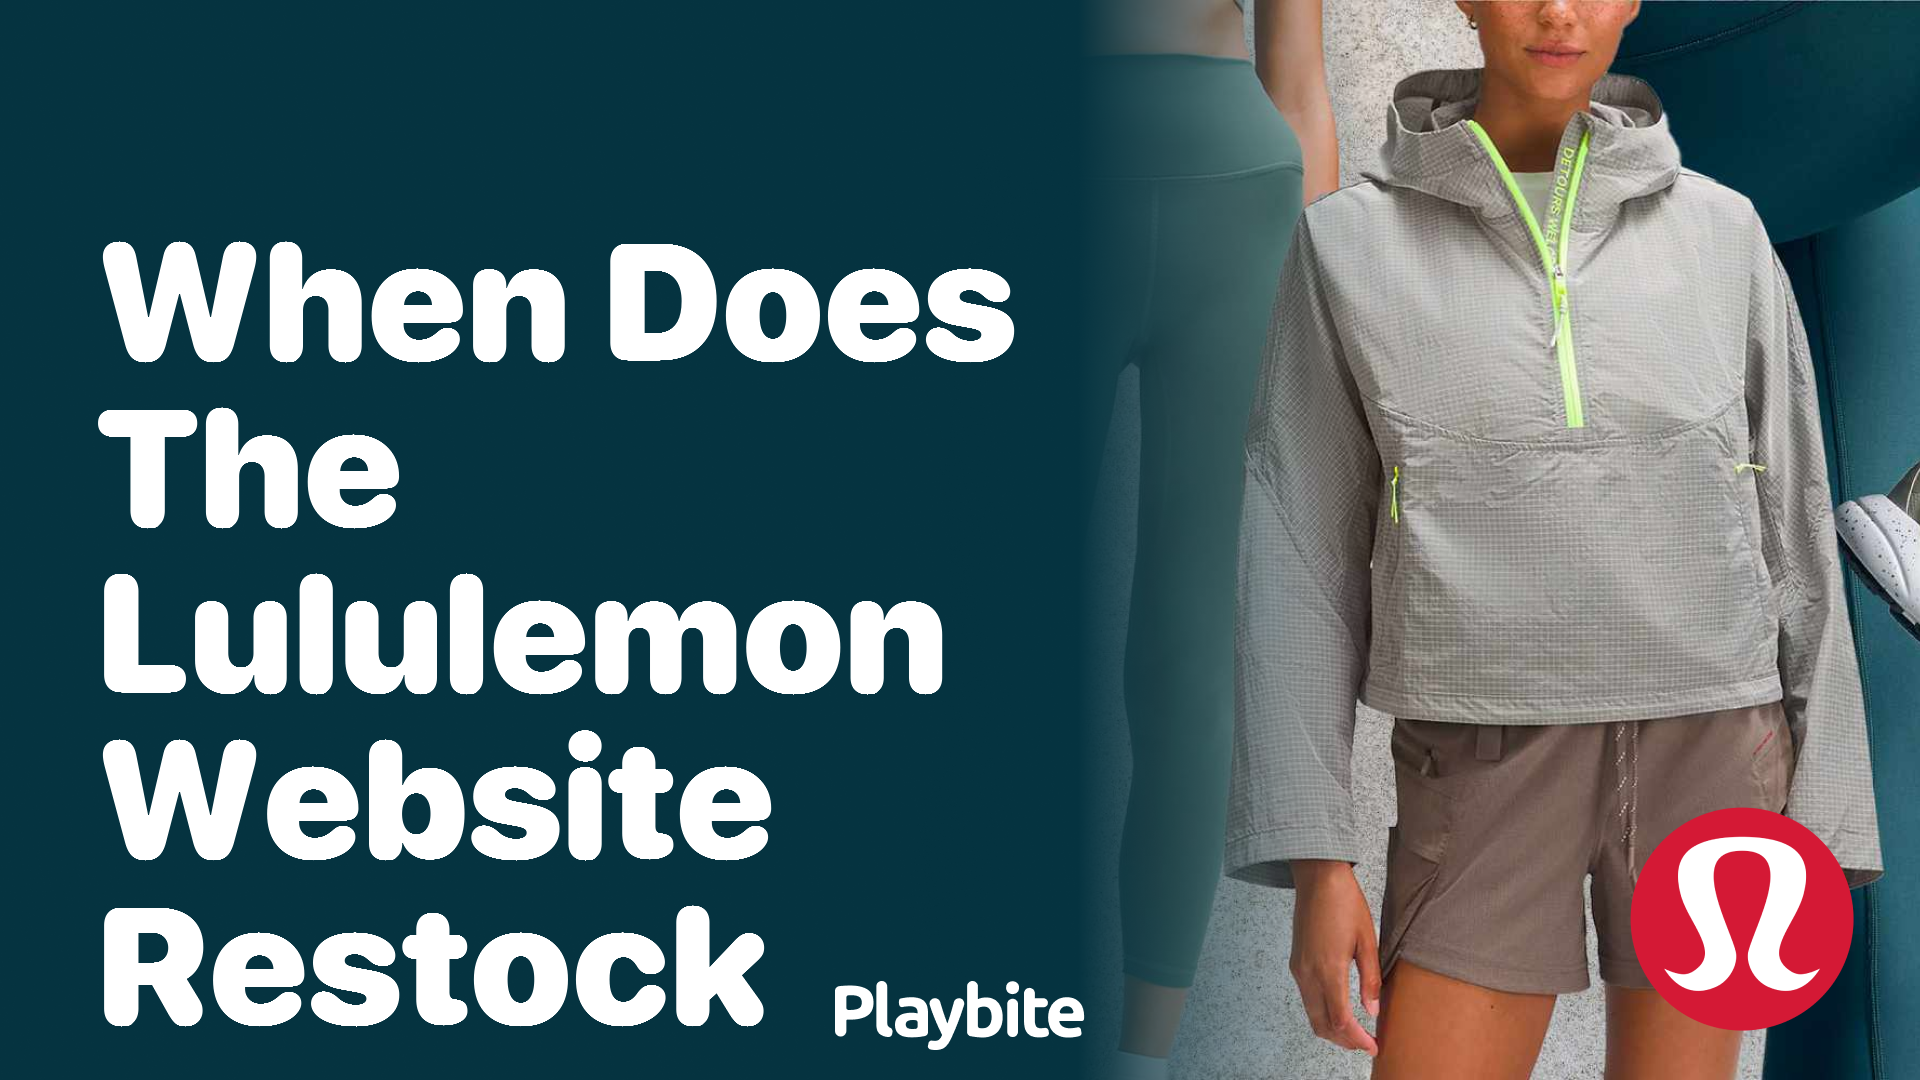 When Does the Lululemon Website Restock? Find Out Here! - Playbite